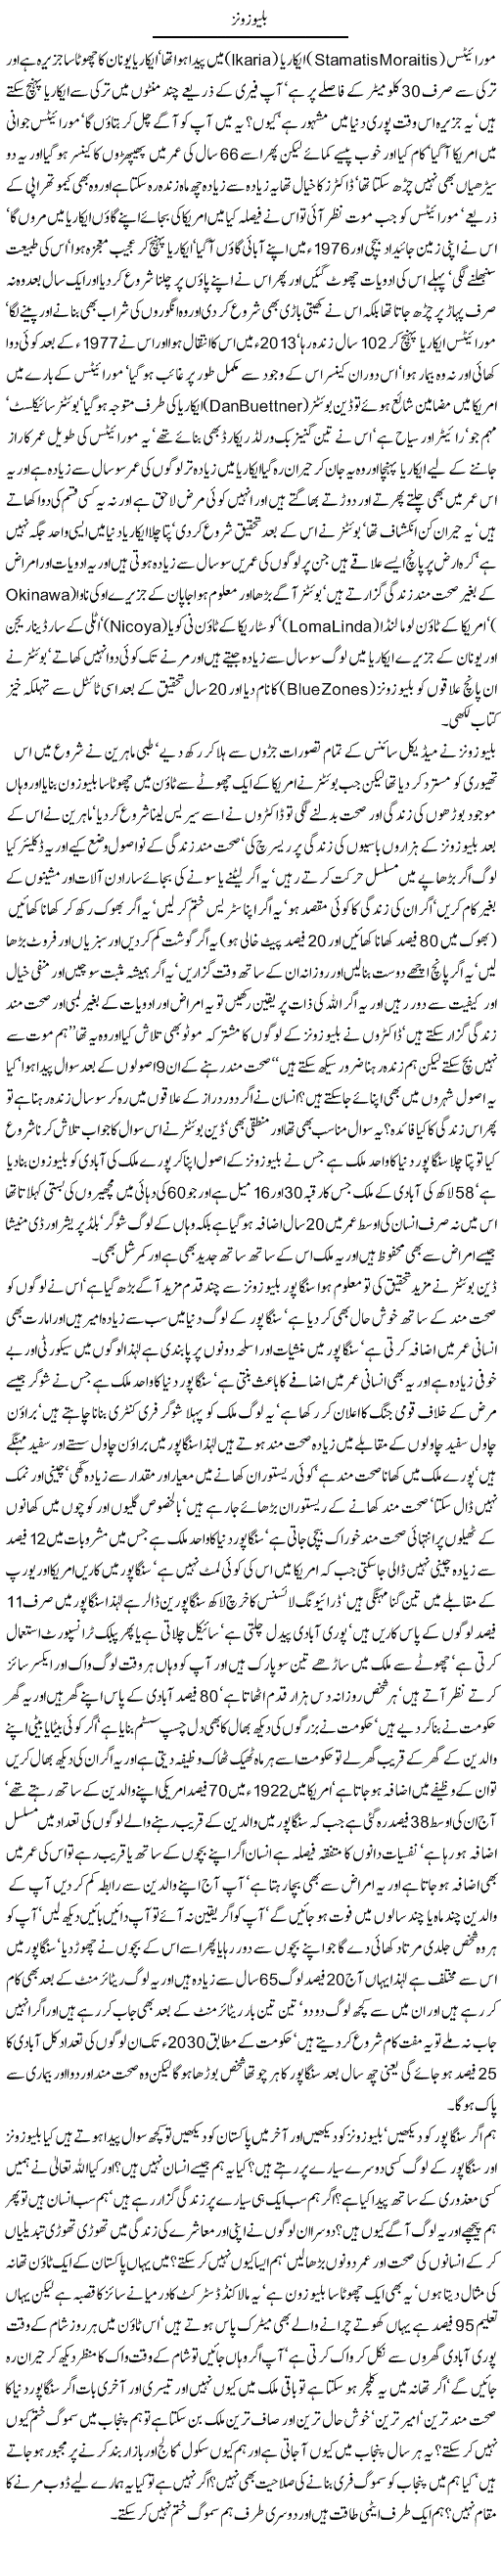 Javed Chaudhry Column About BlueZones Singapore And Pakistan